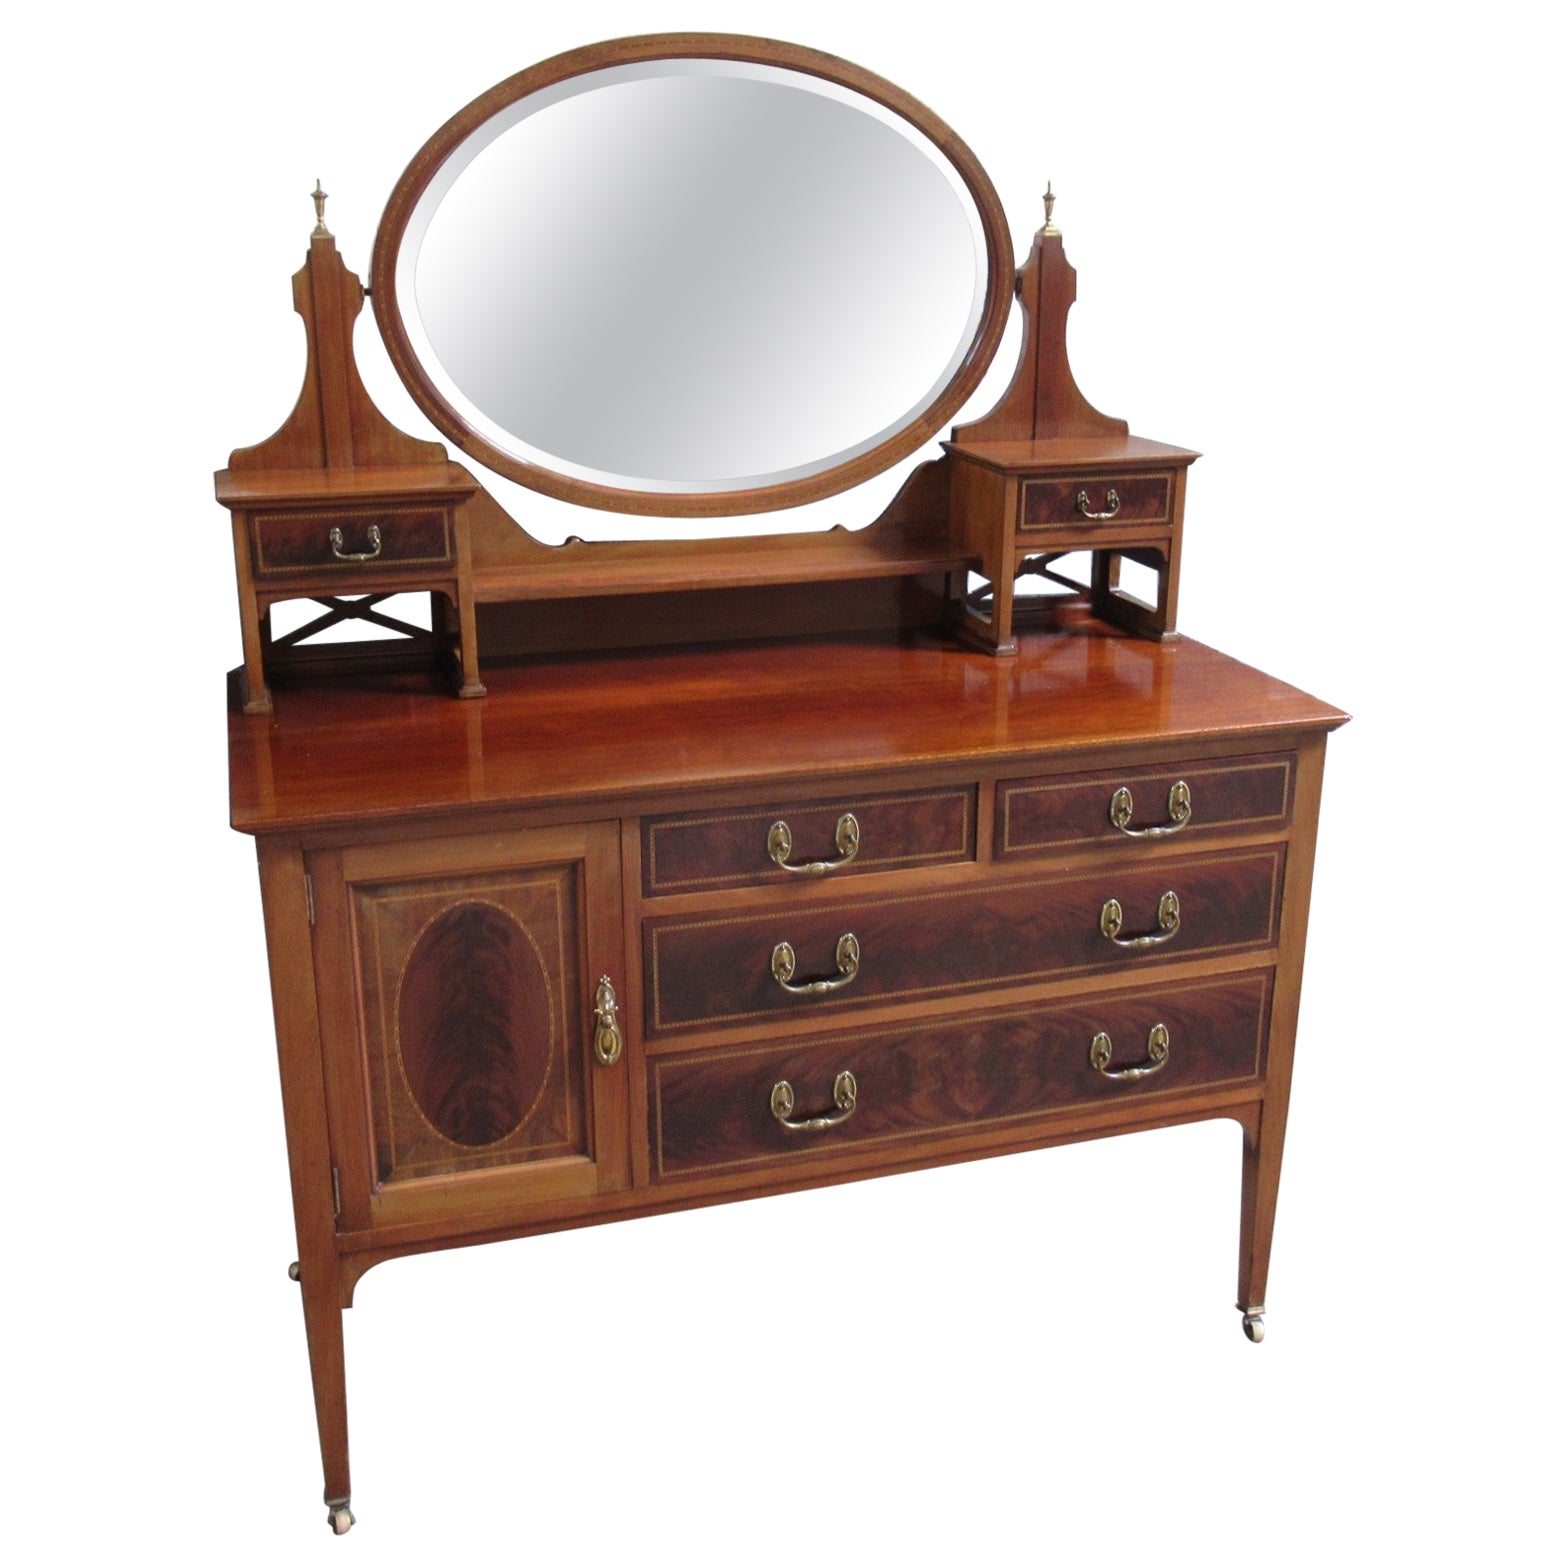 Lovely Antique English 19th C. inlaid flame mahogany Dressing Table or Vanity For Sale